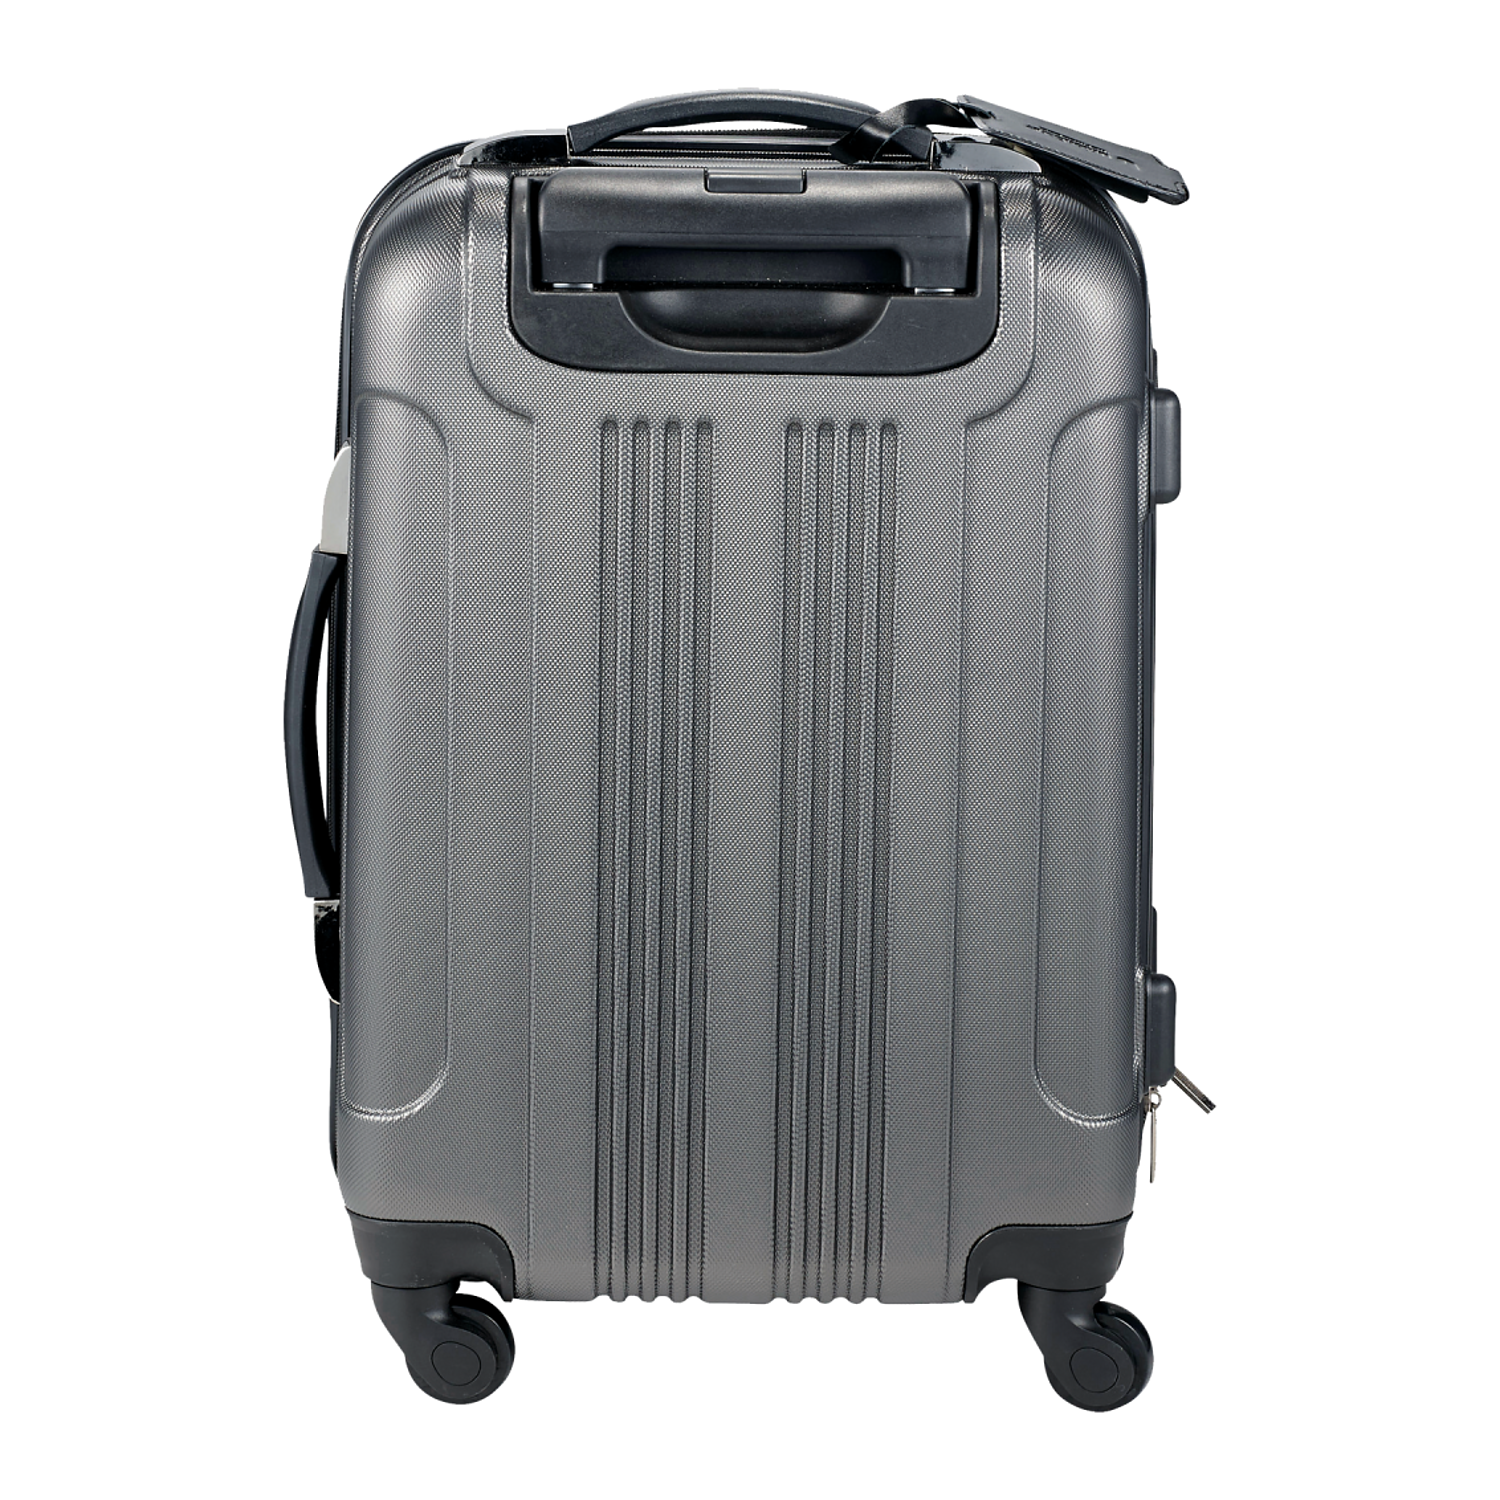 Kenneth Cole 9950-80 - Out of Bounds 20" Upright Luggage